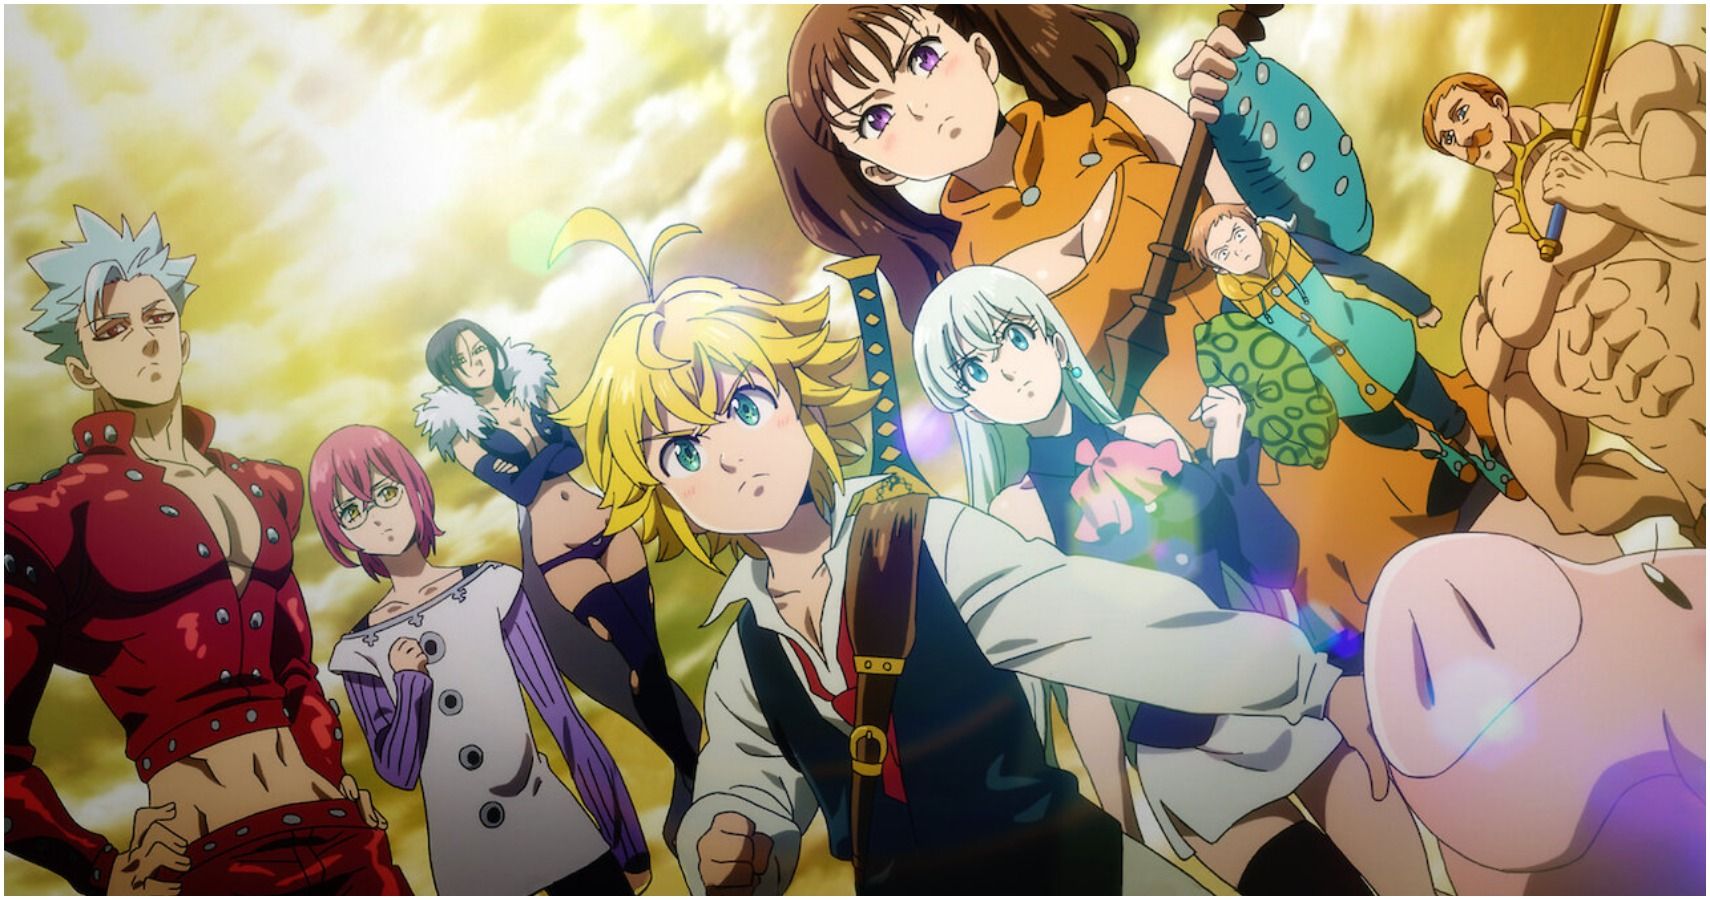 Imperial Wrath of the Gods Review - The Seven Deadly Sins Season 4